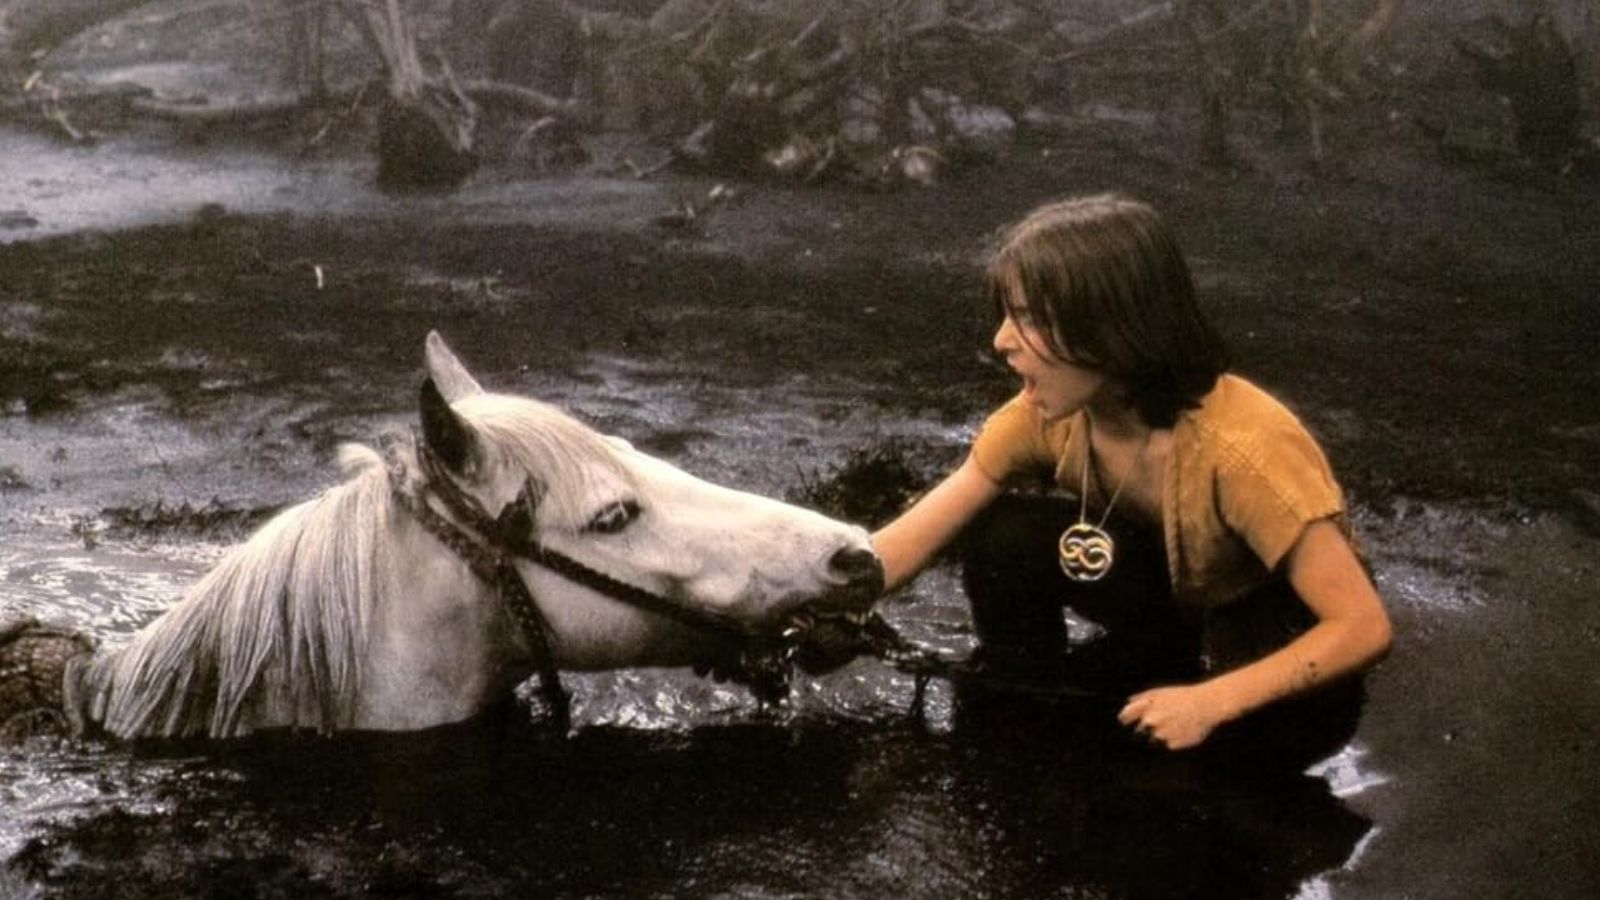 <p>The NeverEnding Story is a beautiful fantasy adventure that follows a young boy named Bastian as he reads a magical book. However, the enchanting world and captivating characters couldn’t save us from Artax’s death scene. The moment when he sinks into the Swamps of Sadness – pure nightmare fuel.</p>